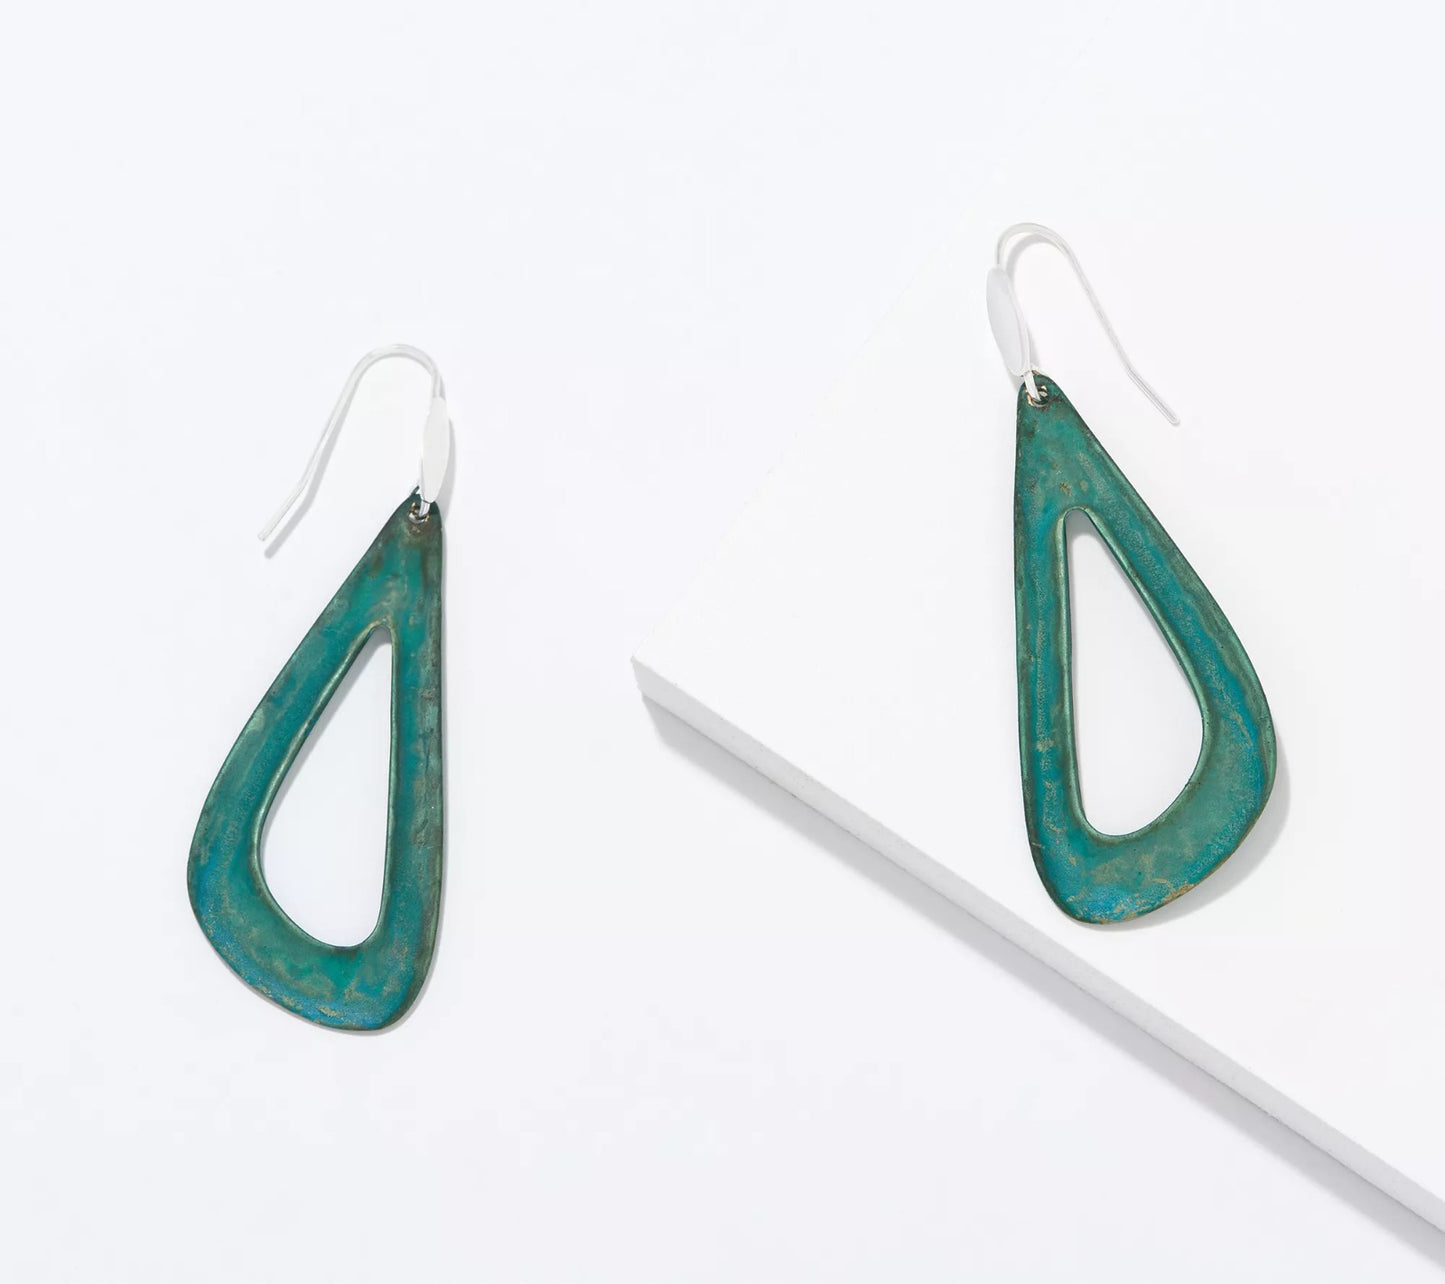 RLM Patina Openwork Blue Color Drop Earrings, Size 2-3/4"L